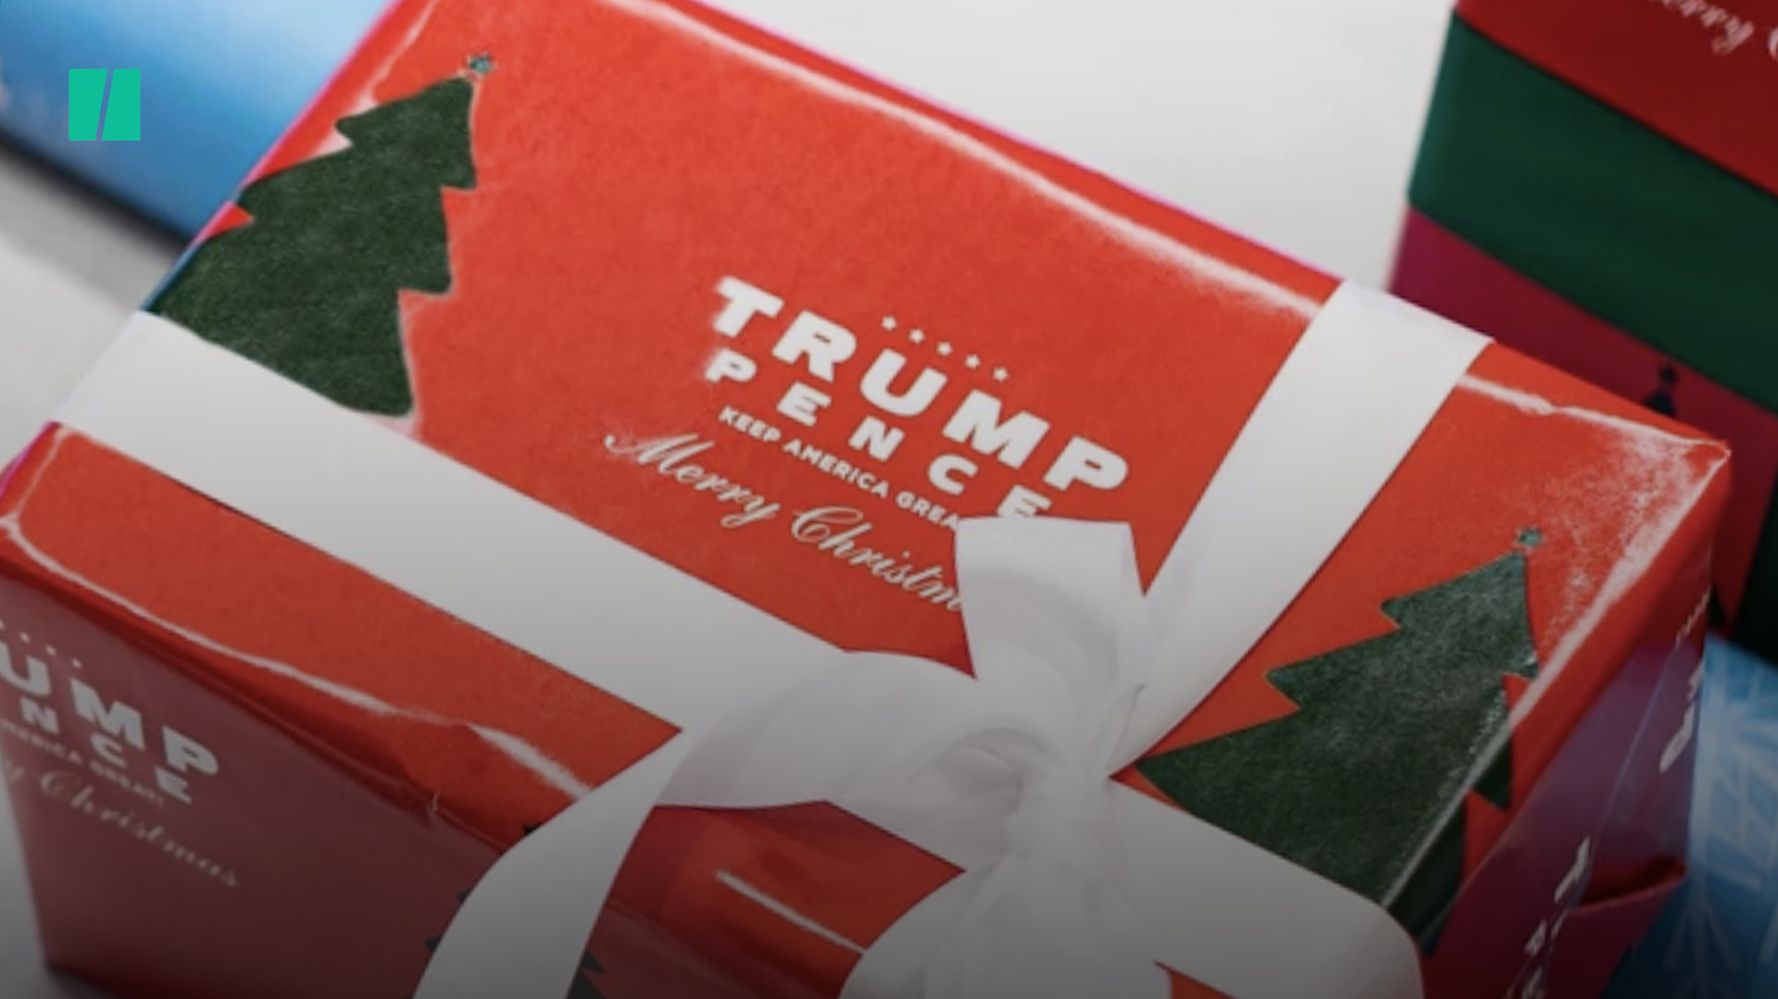 TRUMP Wrapping Paper